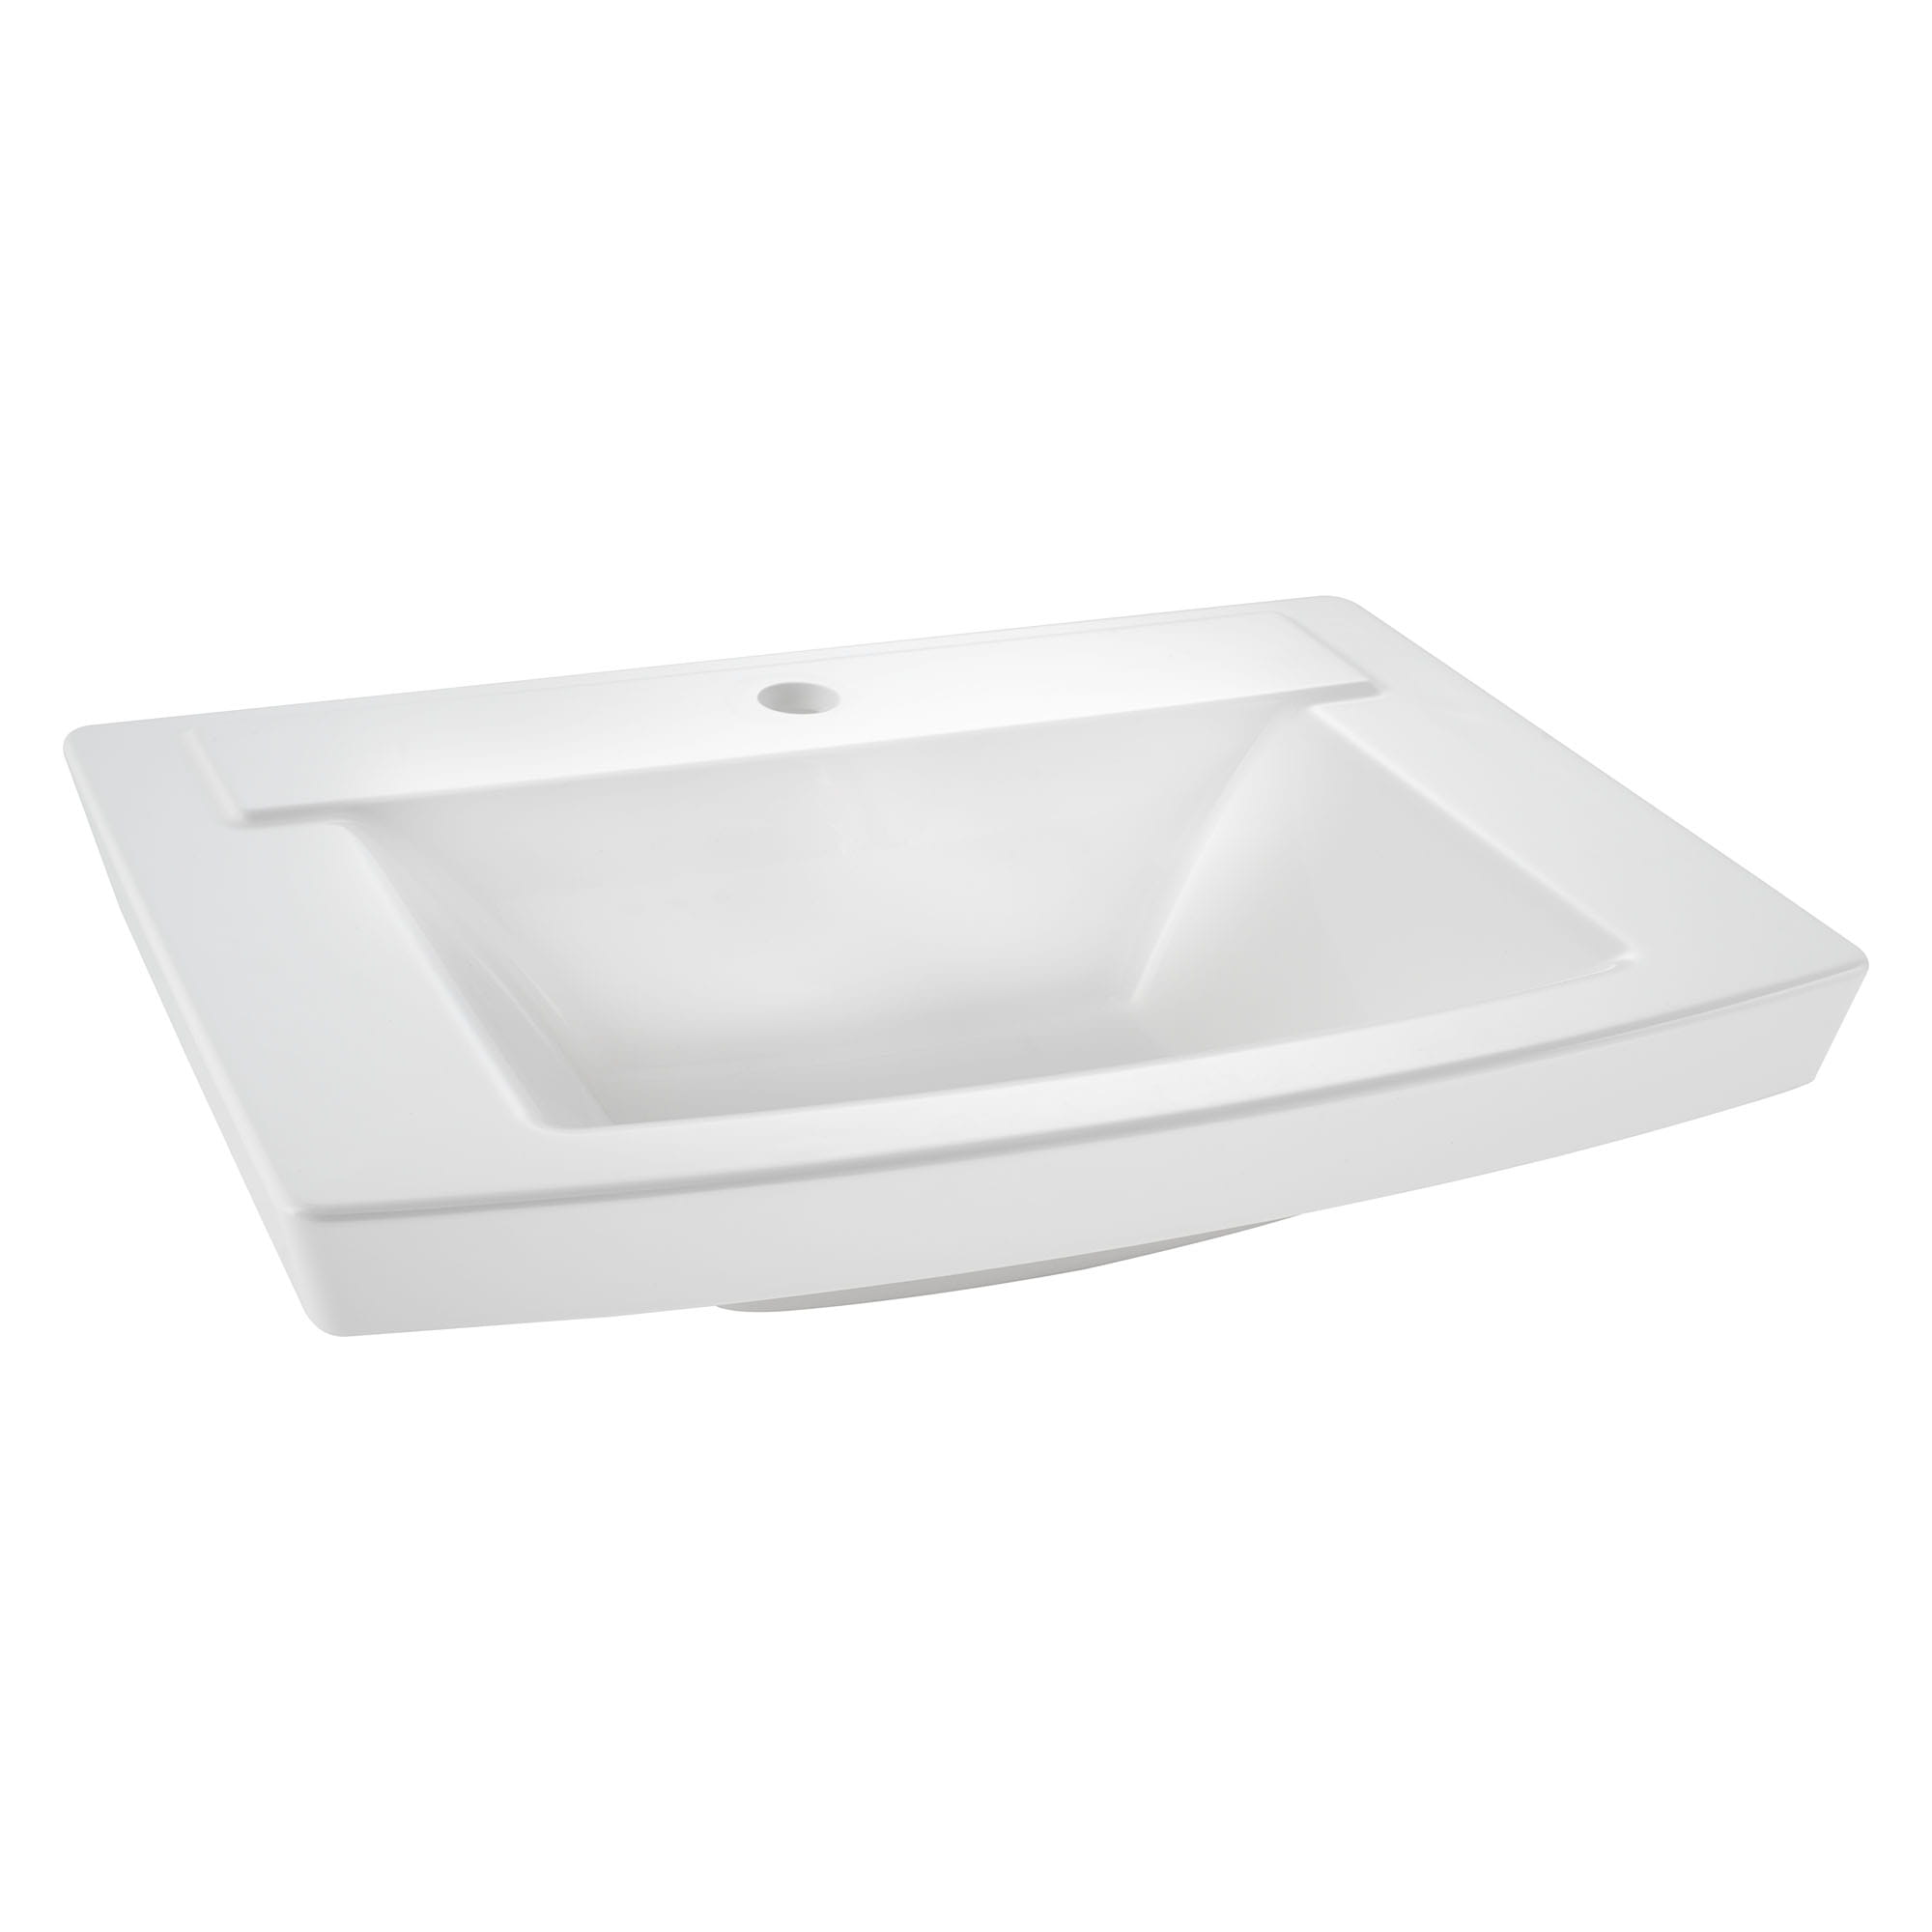 Townsend 24 x 18 Inch Above Counter Sink With Center Hole Only WHITE